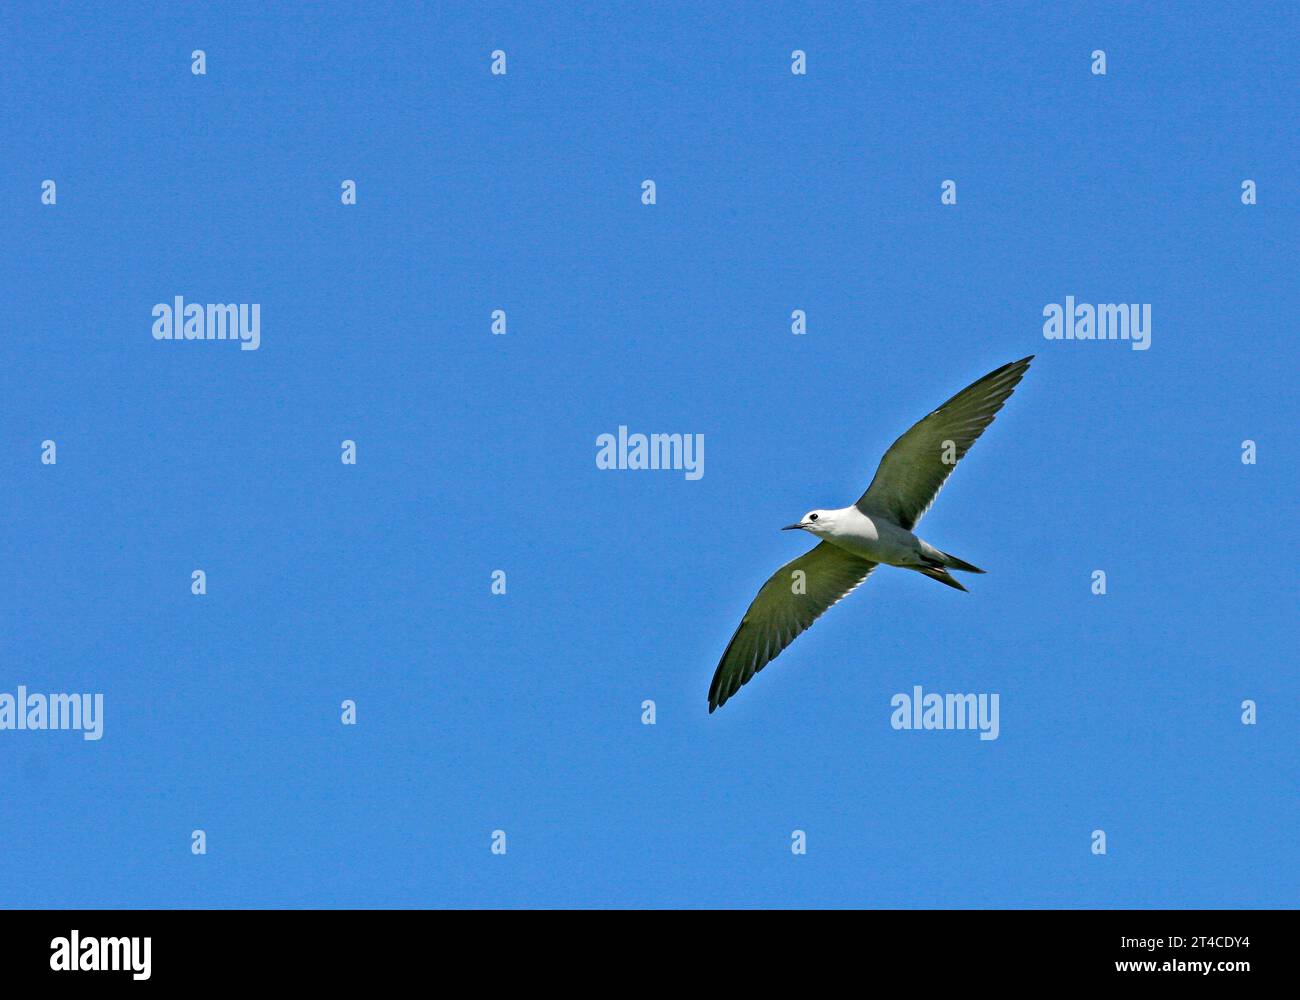 blue-grey noddy, blue noddy, hinaoku, manuohina (Anous ceruleus, Anous cerulea, Procelsterna cerulea), in gliding flight in the blue sky, view from Stock Photo